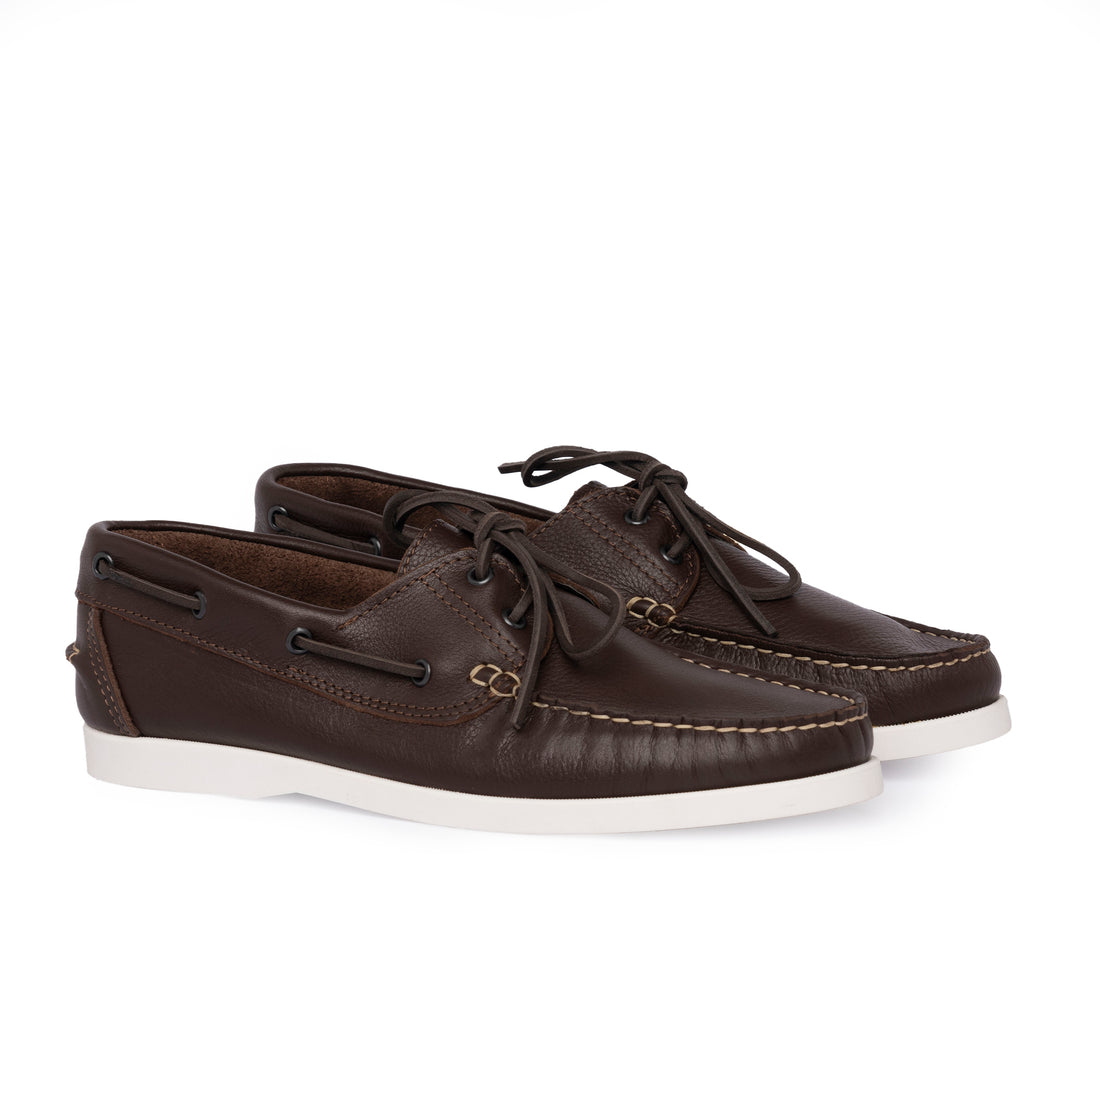 Barca 01 moccasins with laces in dark brown leather